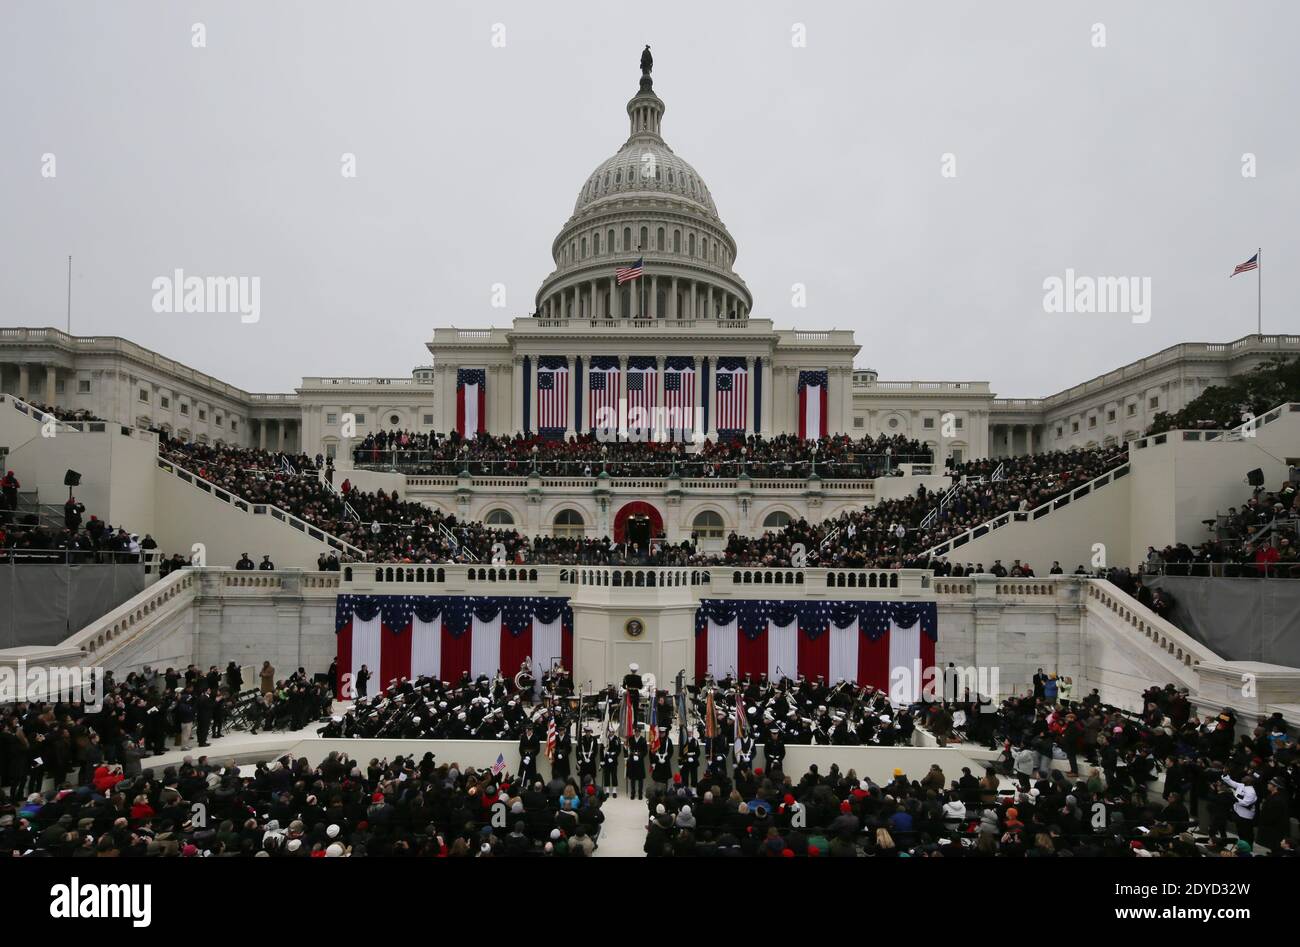 President Barack Obama waves to spectators after his speech at the ceremonial swearing-in at the U.S. Capitol during the 57th Presidential Inauguration in Washington on January 21, 2013. Photo by Scott Andrews/Pool/ABACAPRESS.COM Stock Photo